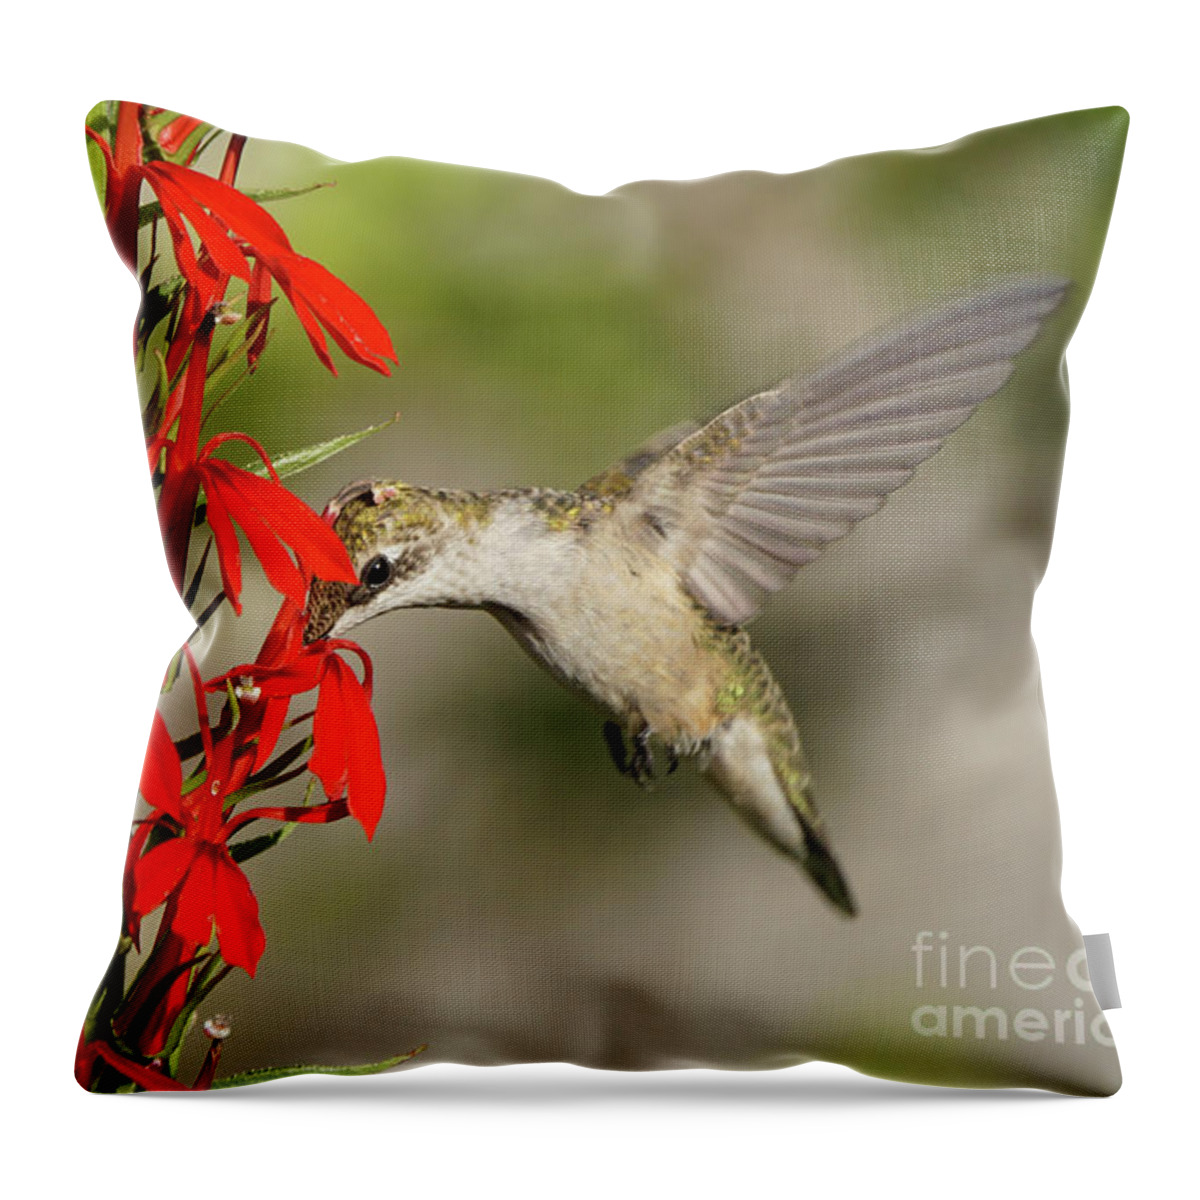 Robert E Alter Throw Pillow featuring the photograph Ruby-Throated Hummingbird Sips on Cardinal Flower by Robert E Alter Reflections of Infinity